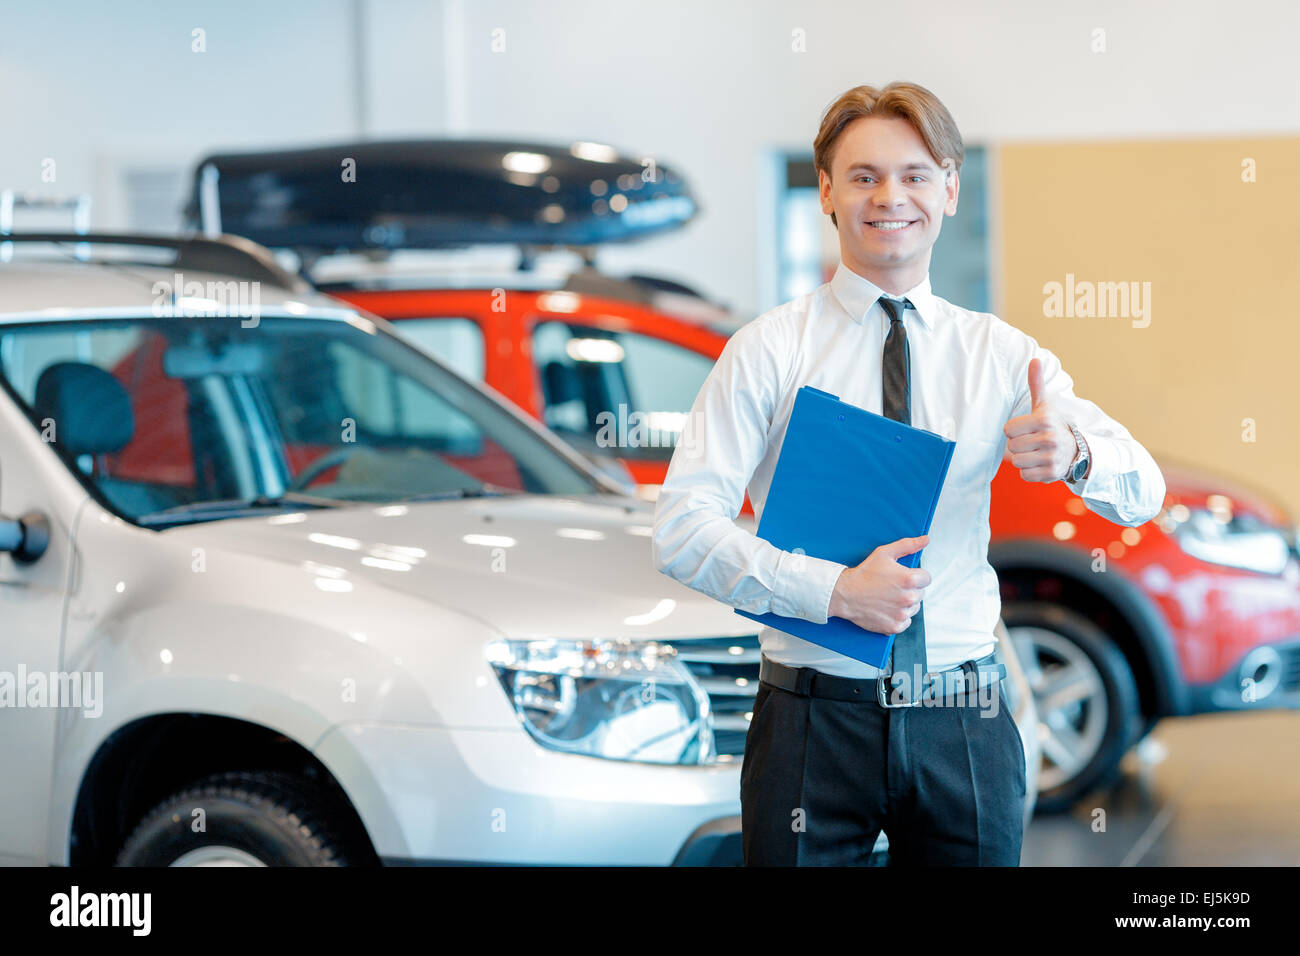 Young smiling salesman with clipboard in car dealership Banque D'Images